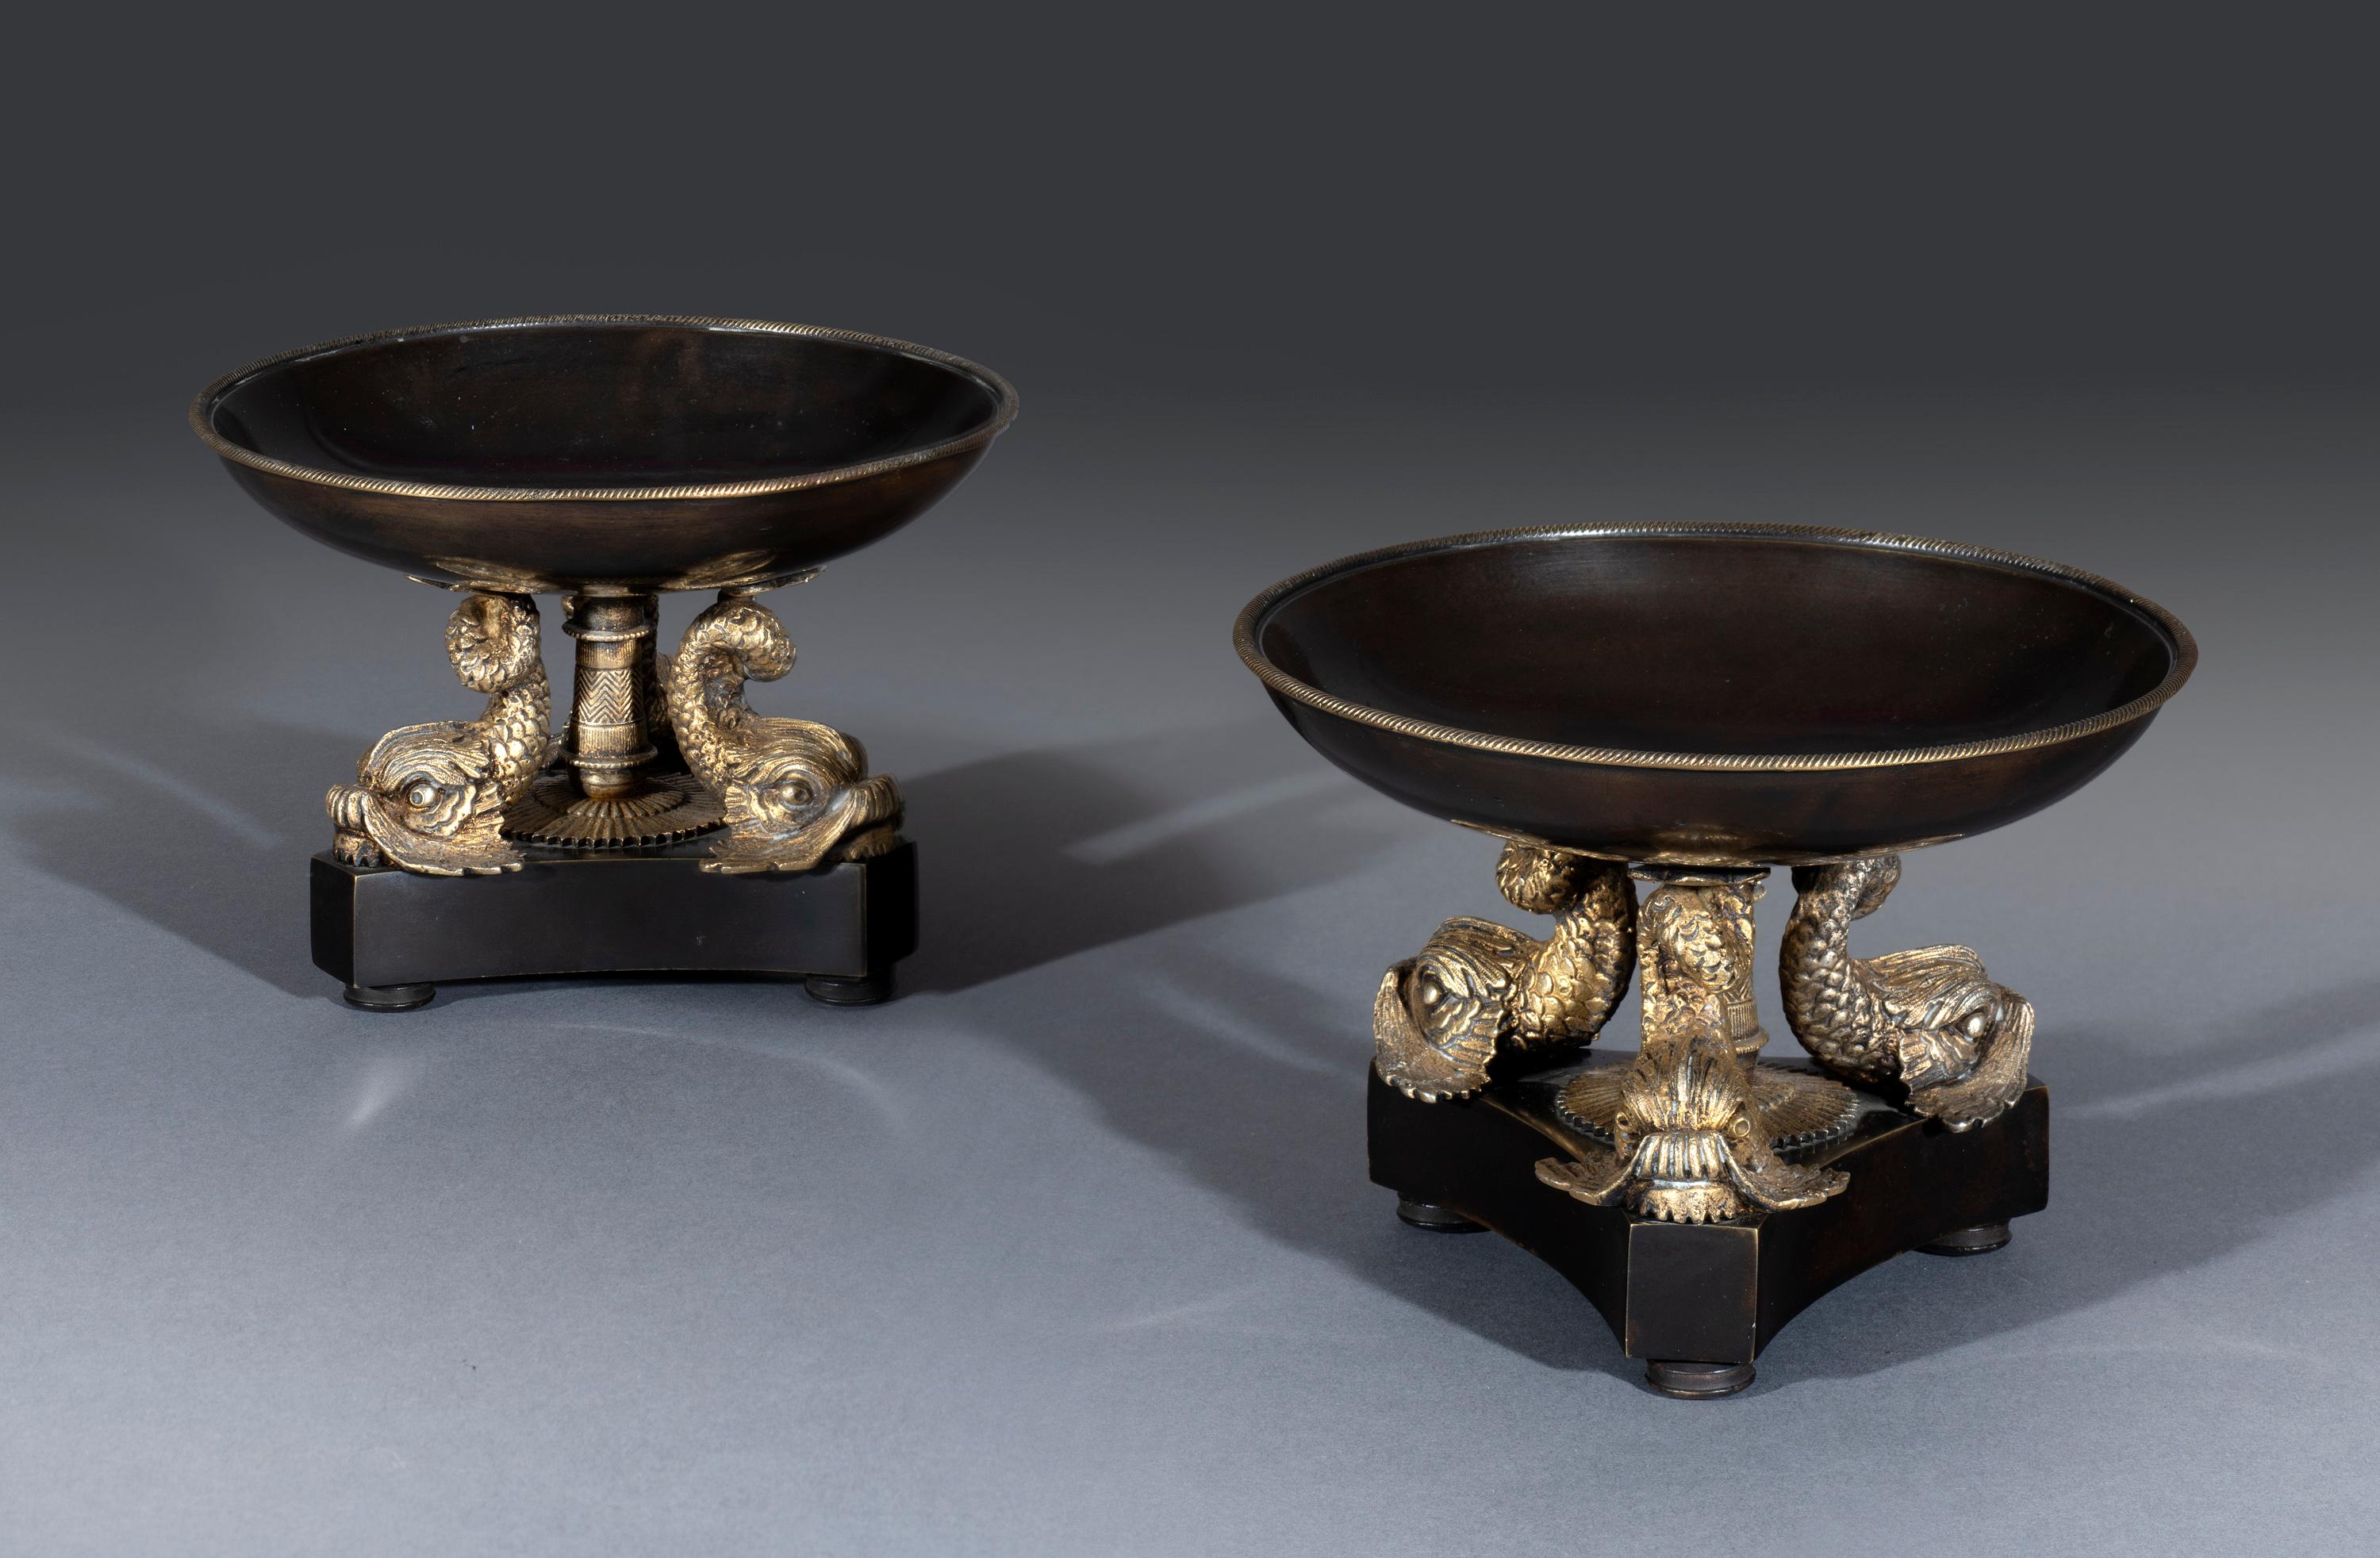 Pair of early 19th century Regency period bronze and gilt ormolu tazzas attributed to Thomas Messenger & Sons (1810 to 1930)

The dish tops are mounted with gilt brass moundings surmounted on crisply cast 'Dolphin supports' and a central column.